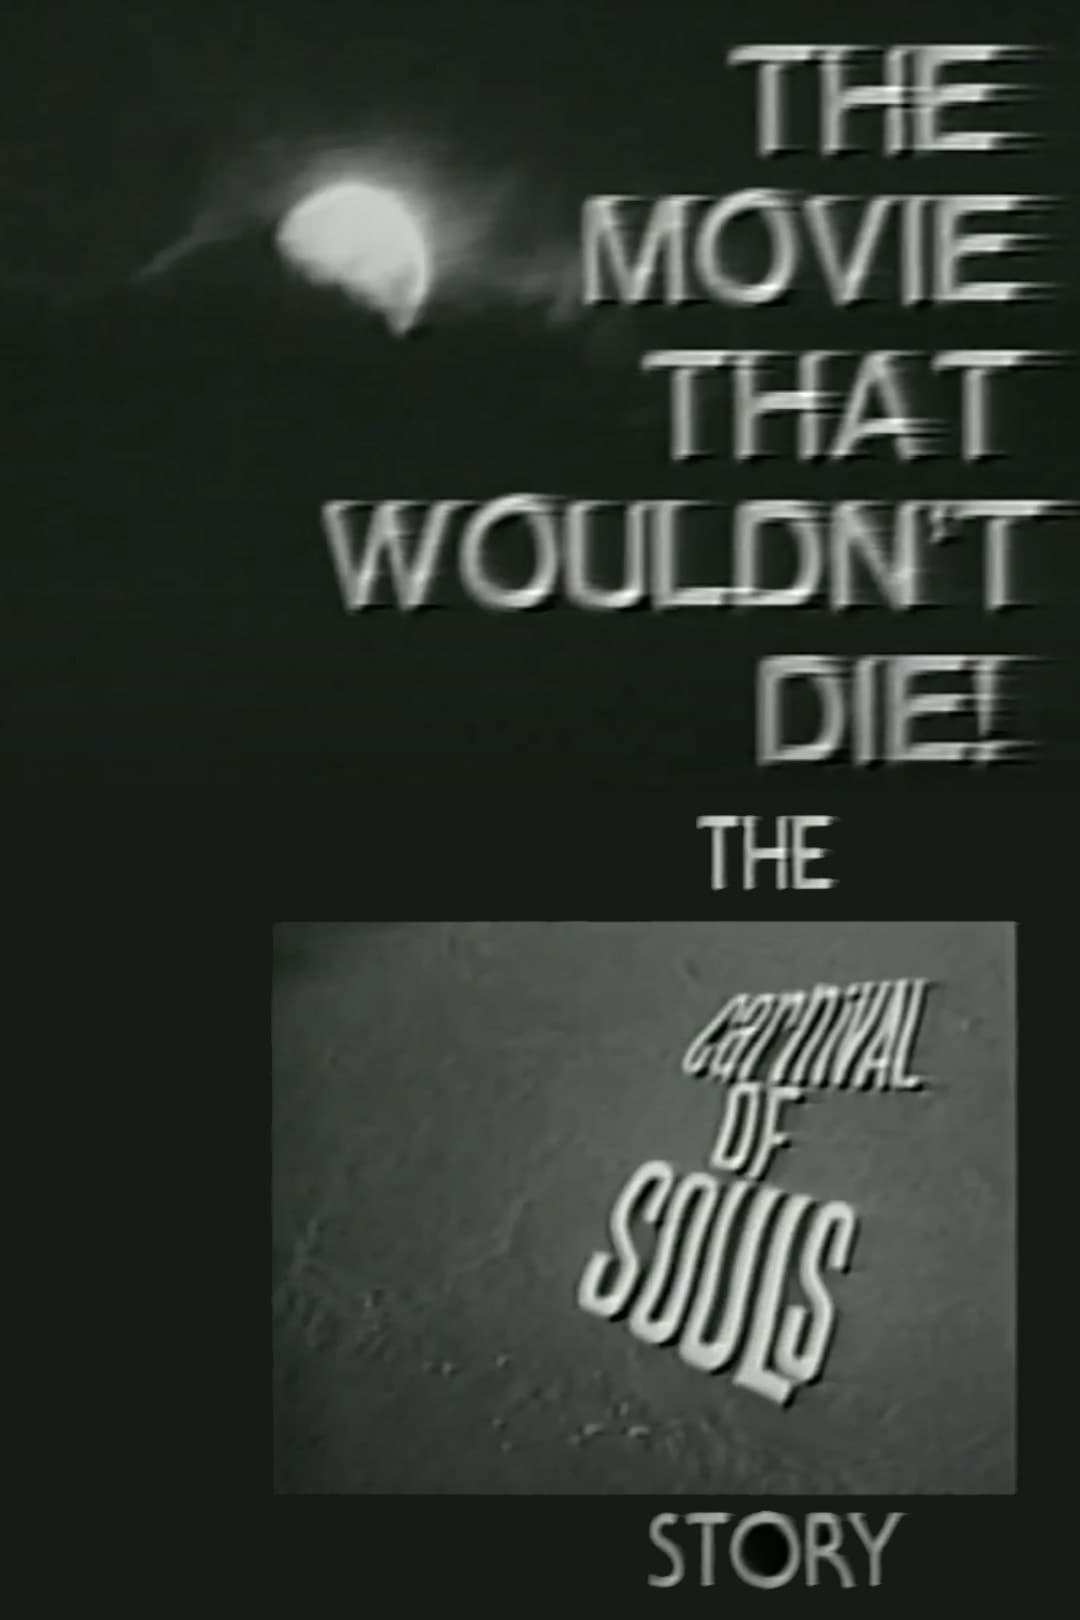 The Movie That Wouldn't Die! – The 'Carnival of Souls' Story